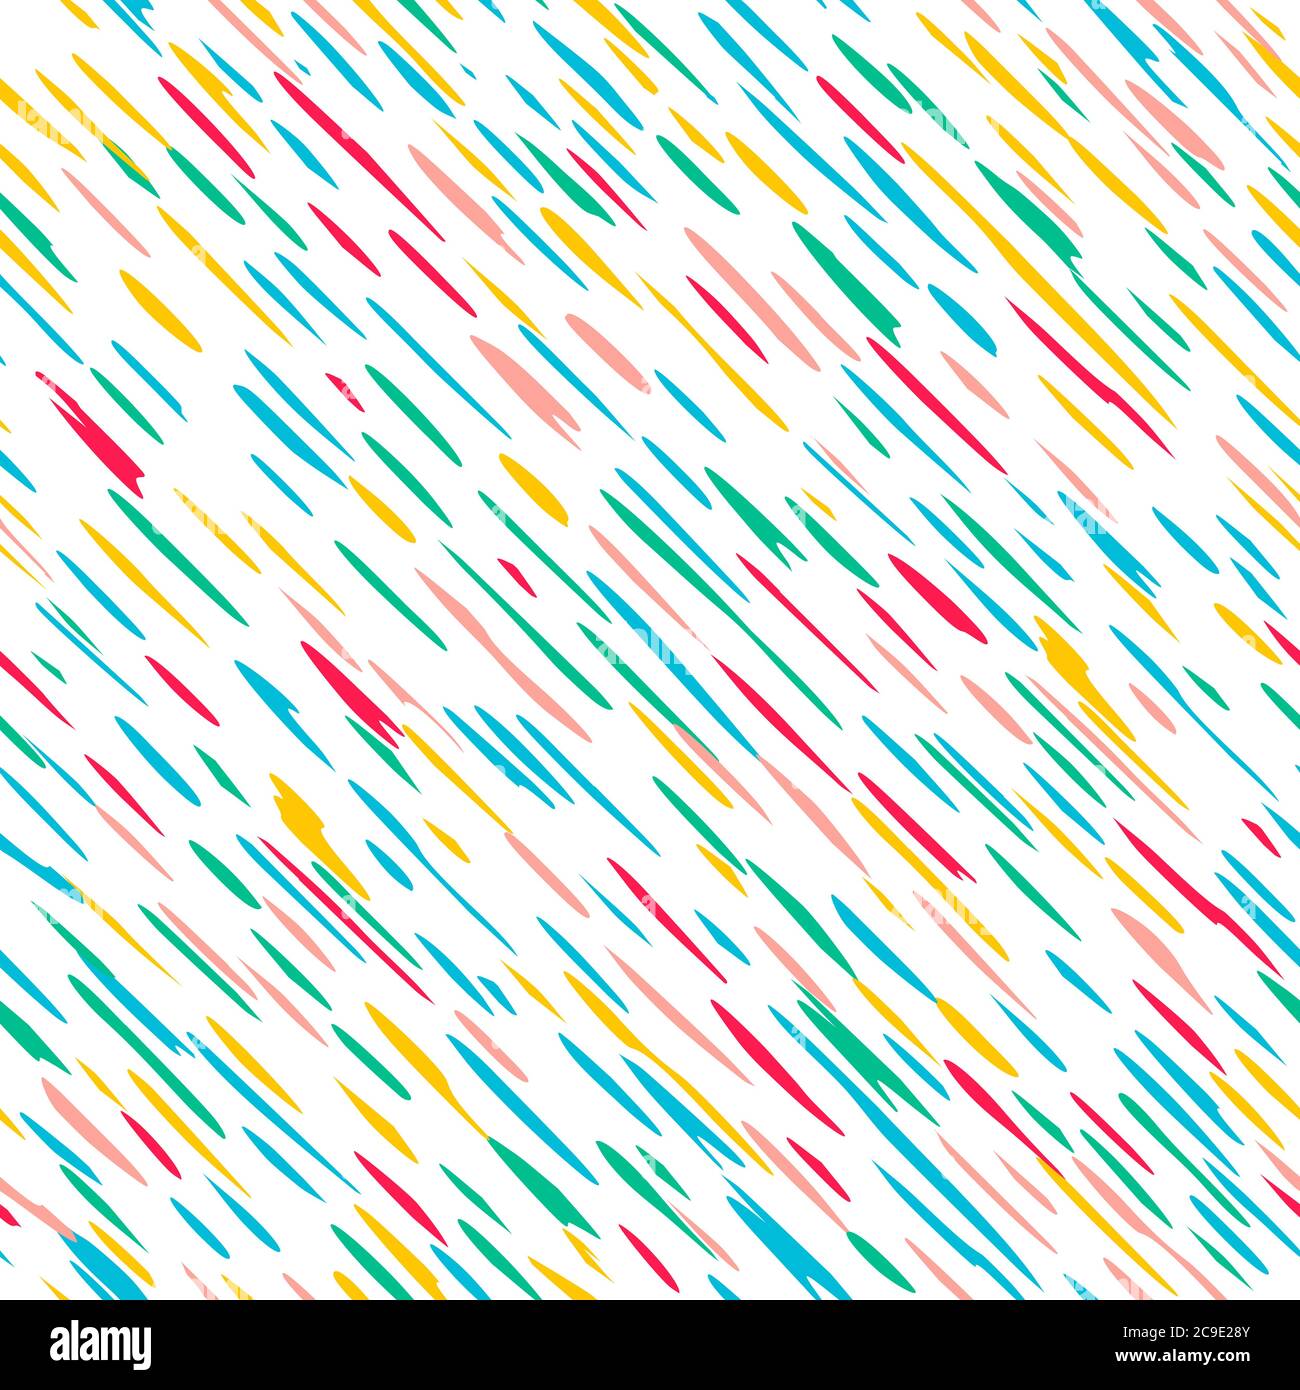 Seamless pattern, chaotic multicolored freehand lines, elongated spots on a white background. Stock Vector